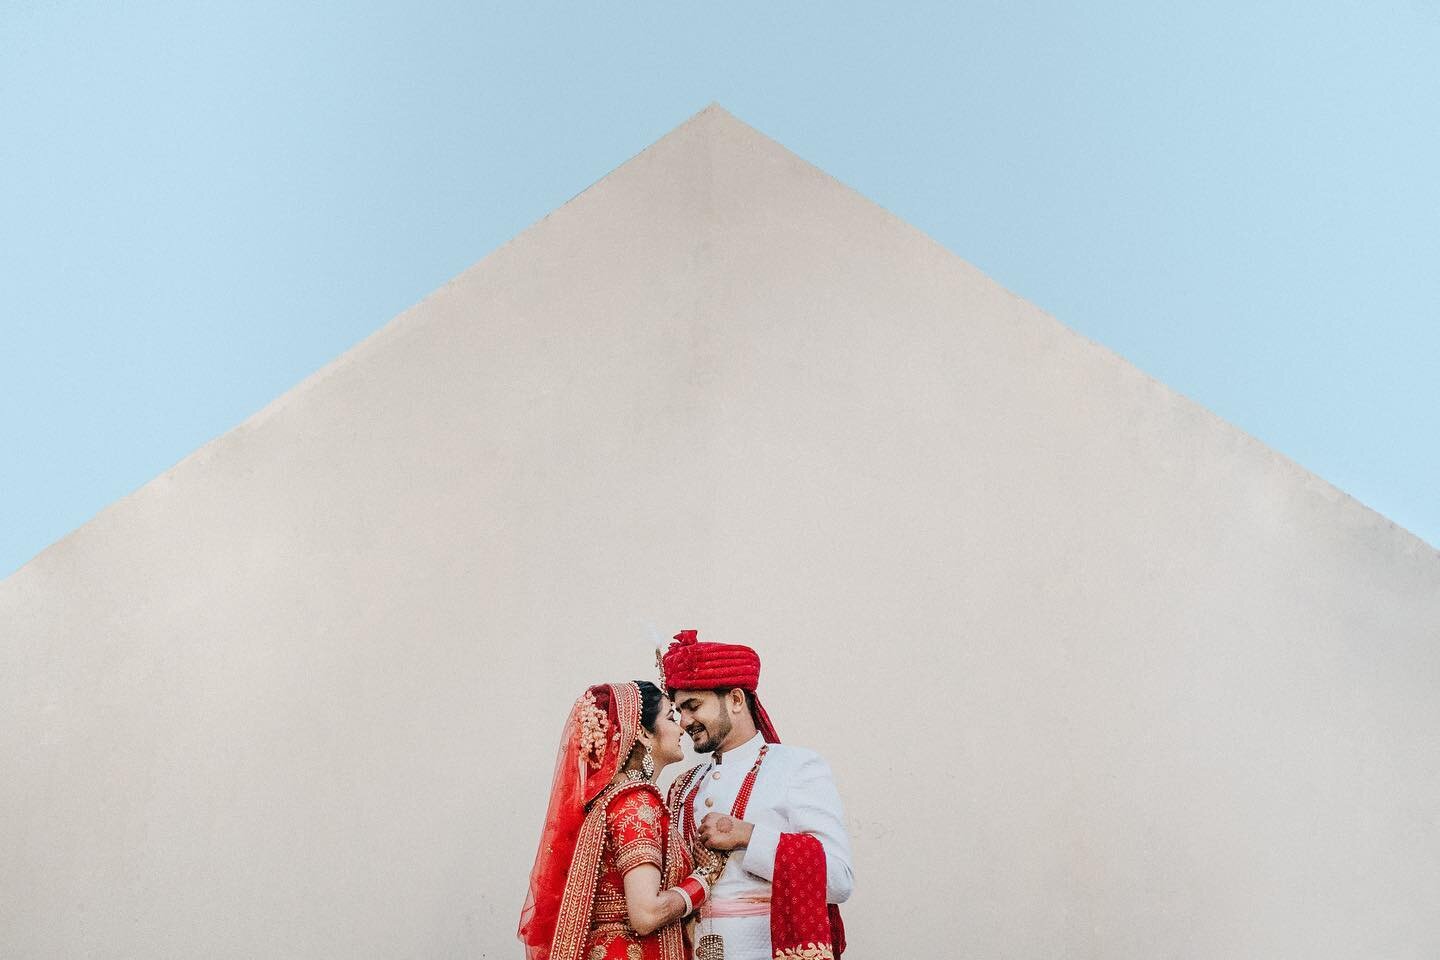 Out of those millions images I shot this has to my personal favourite from @akshitamakin @nimayjindal wedding ✨&hearts;️
.
Shot along with @pallabgolui @ayushhmanbhava